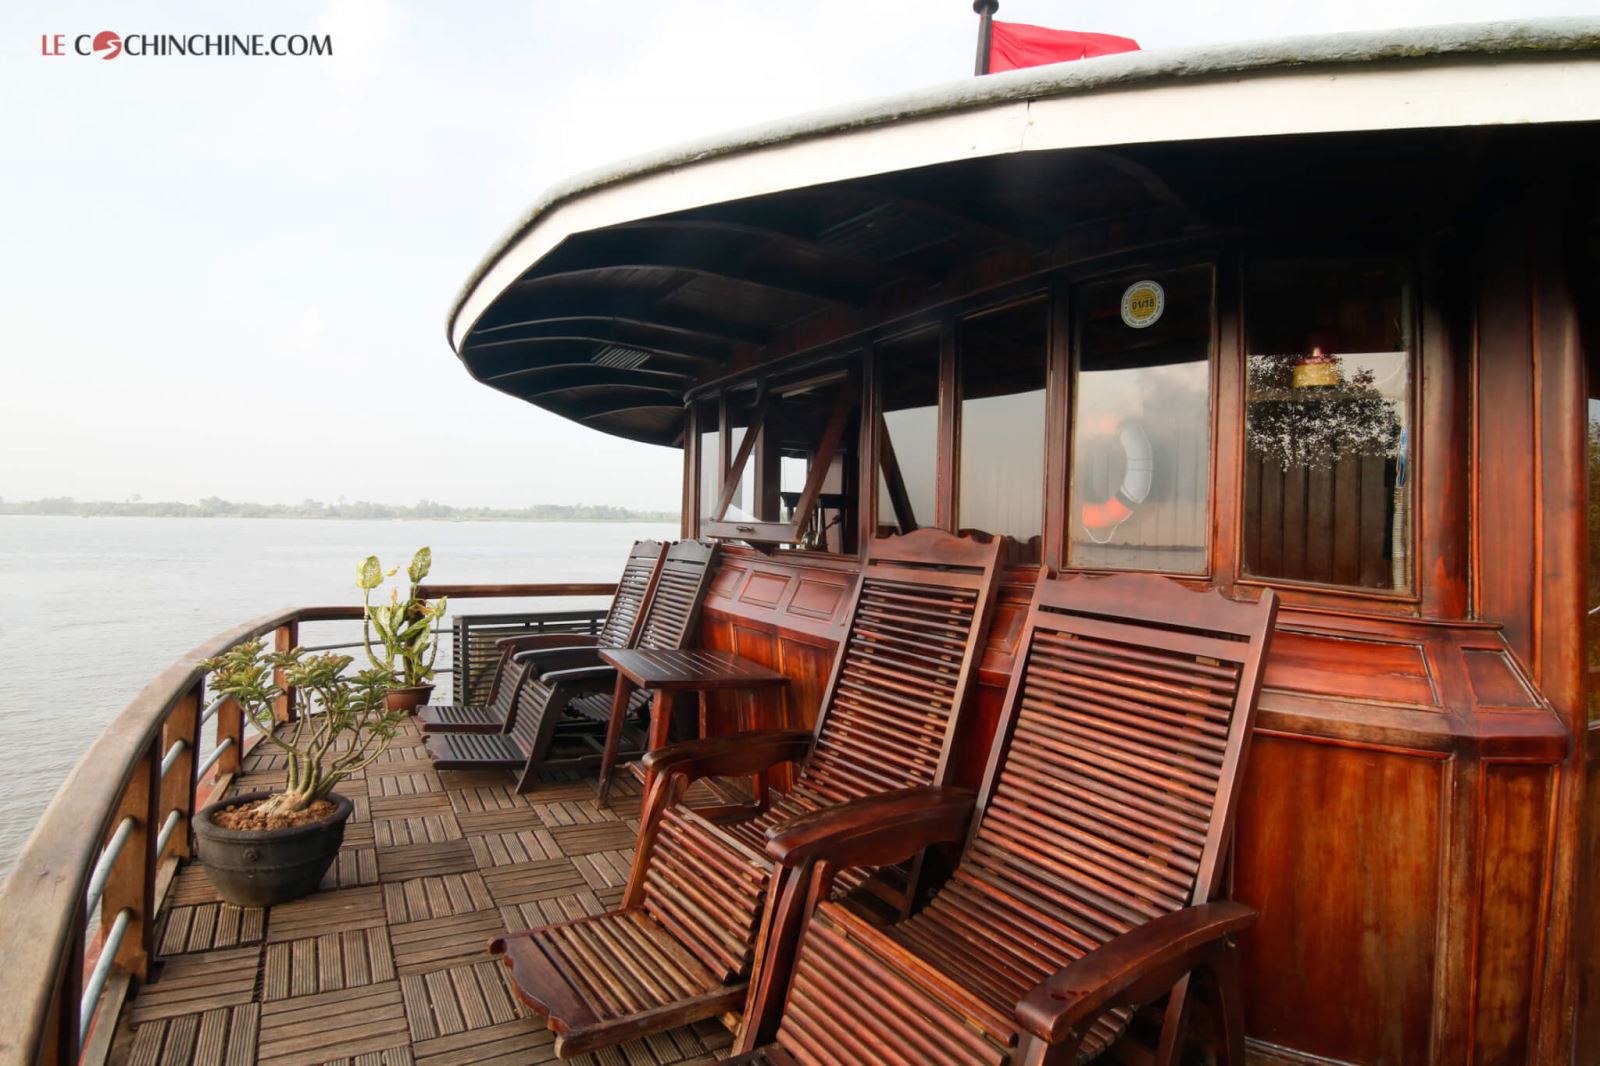 2 Days Charming Mekong With Lecochinchine 10 Cabins